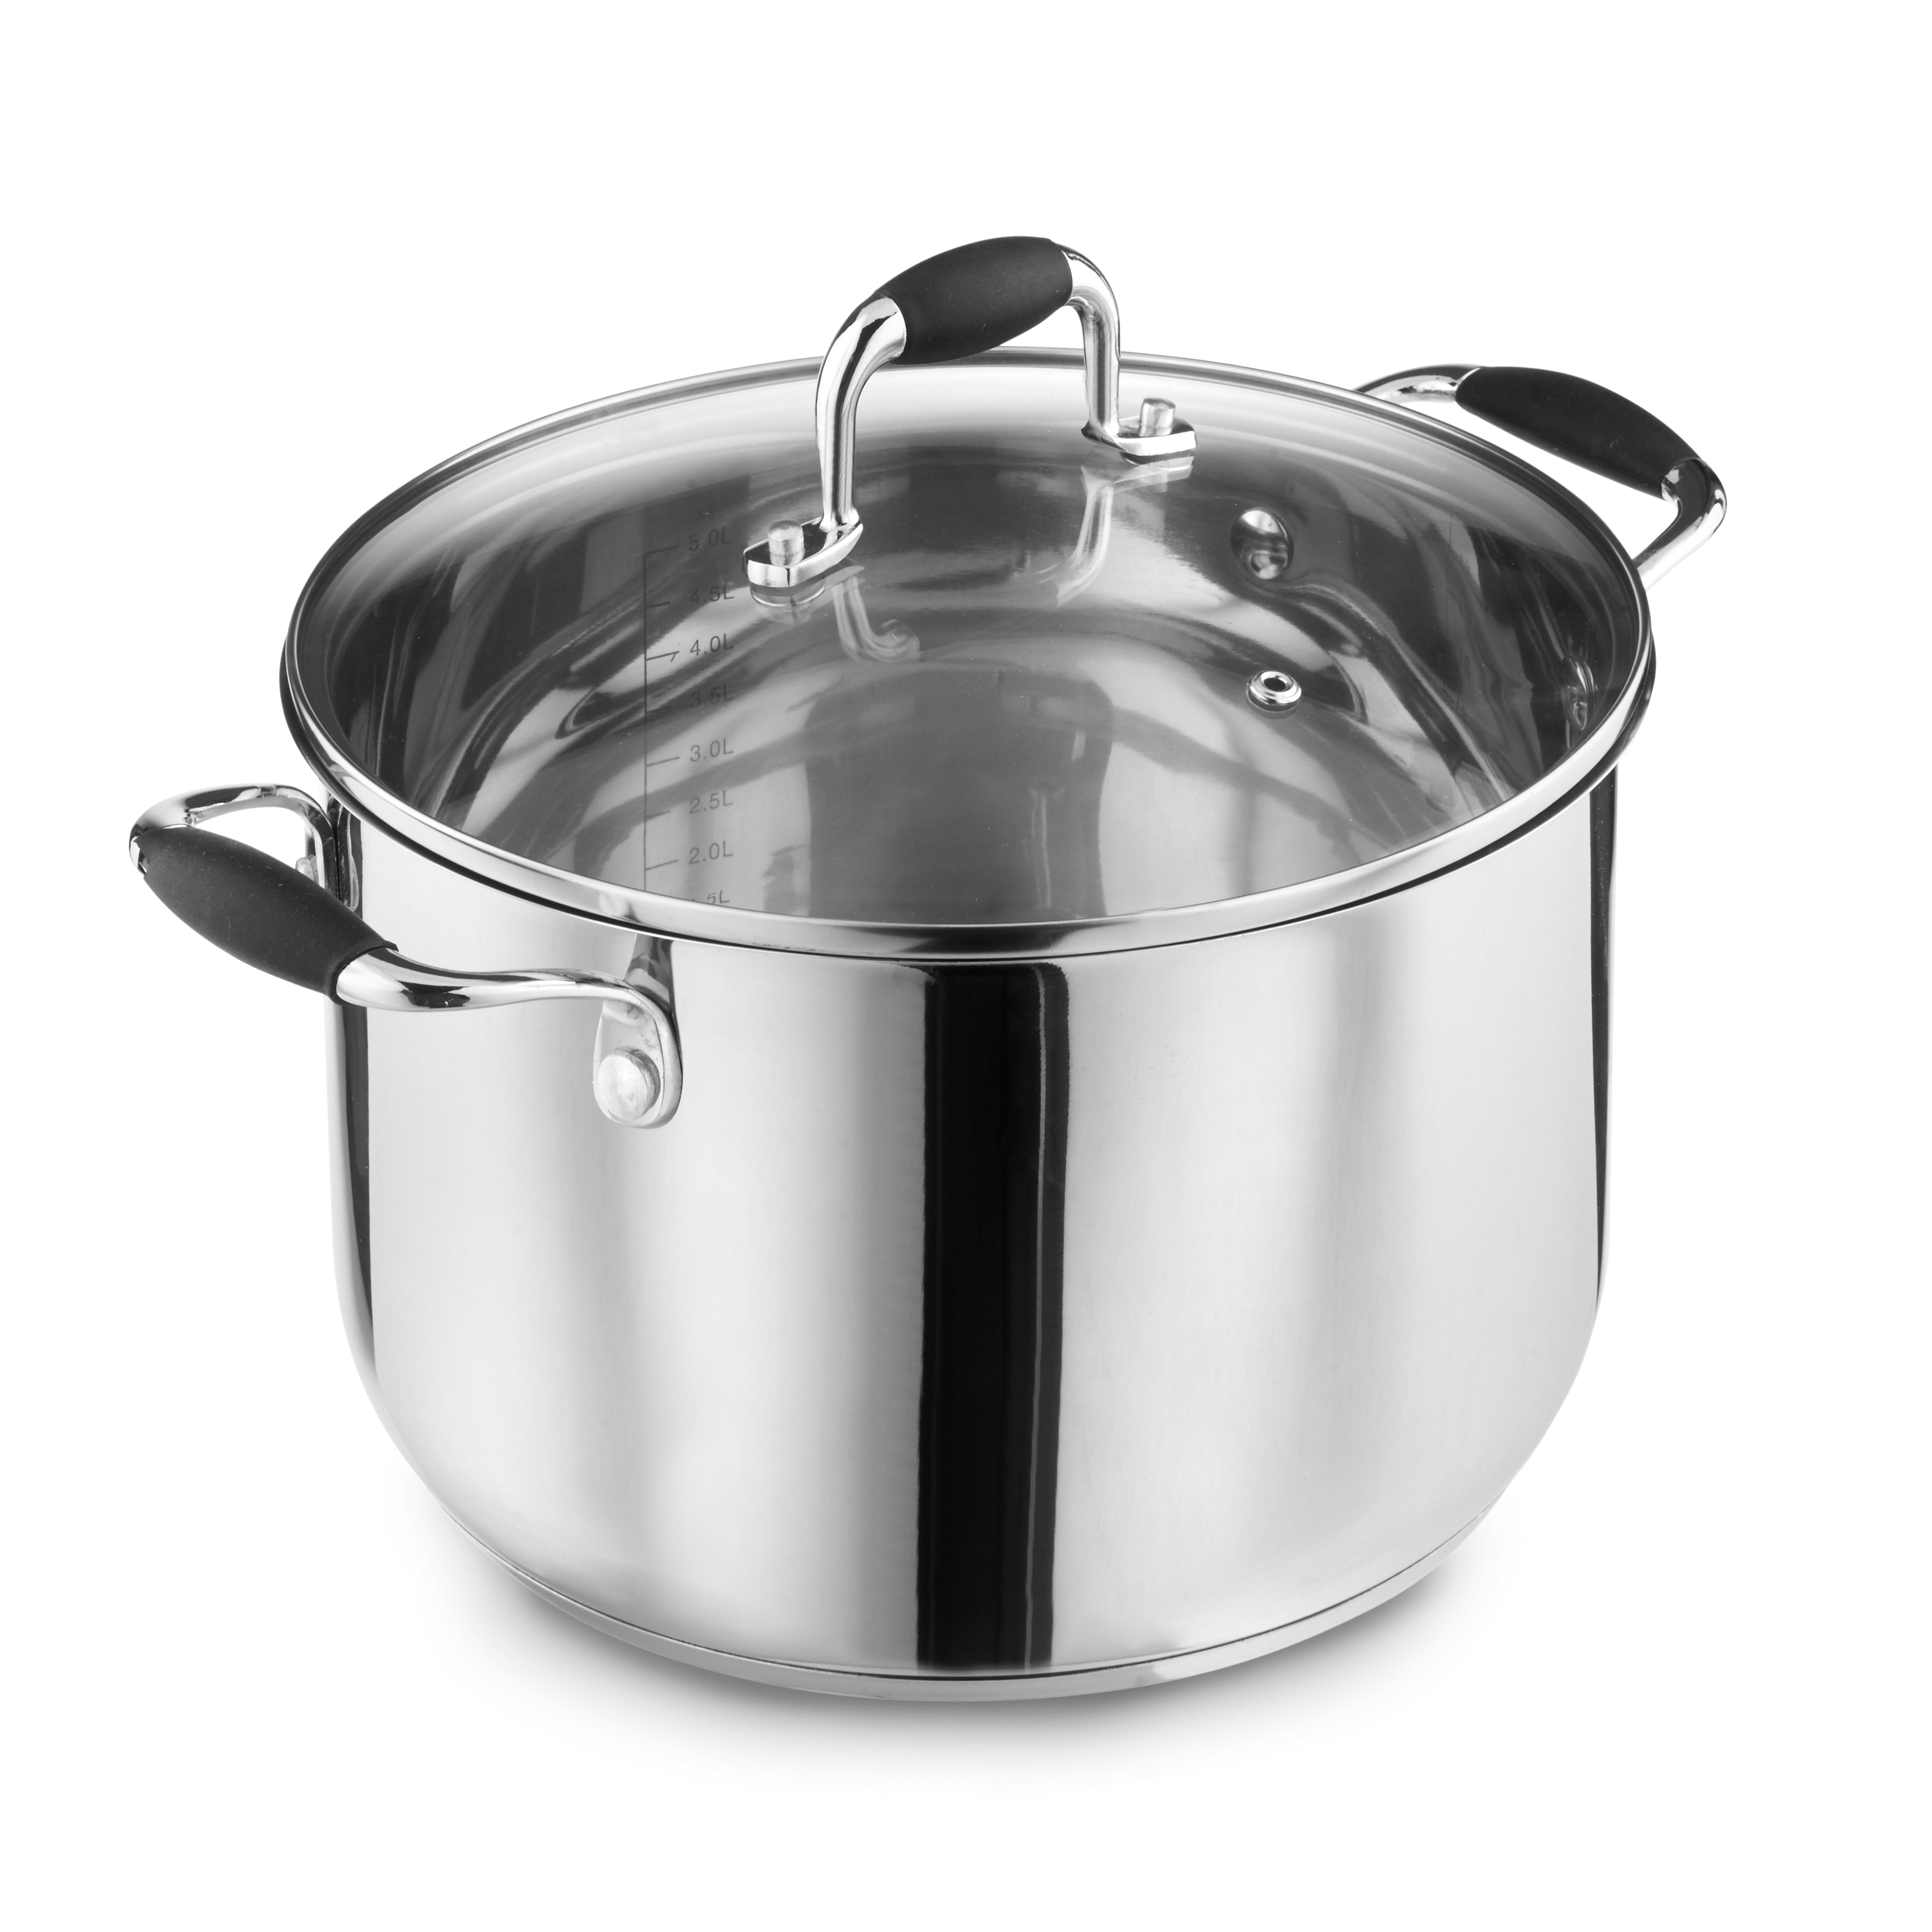 Lewis’s Stainless Steel Stockpot 24cm with Glass Lid - Silver  | TJ Hughes